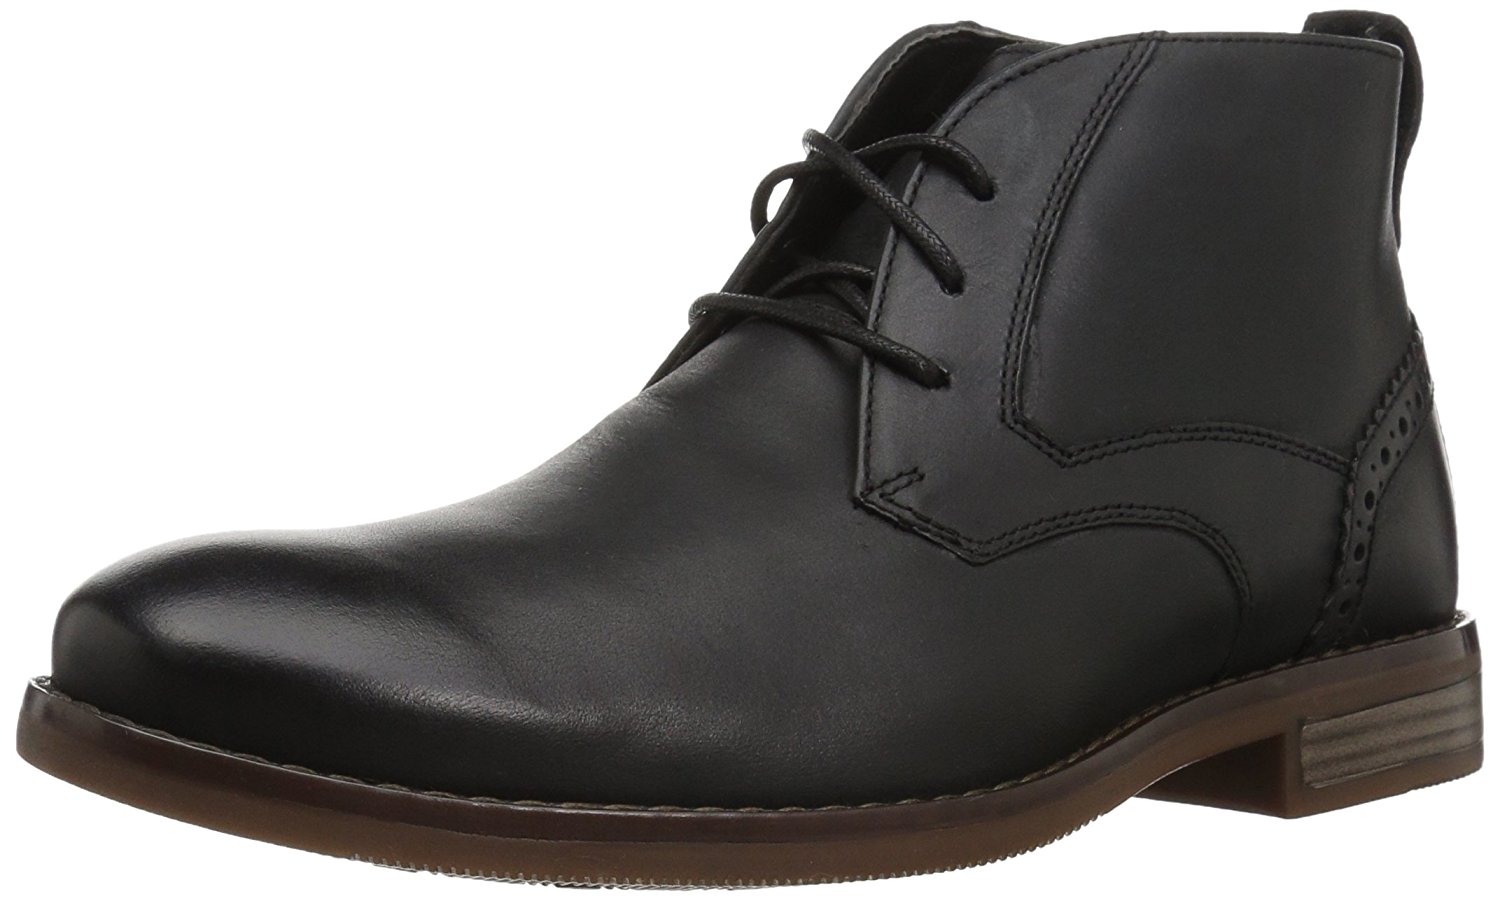 Rockport Mens KARWIN Leather Round Toe Ankle Fashion Boots, Black, Size ...